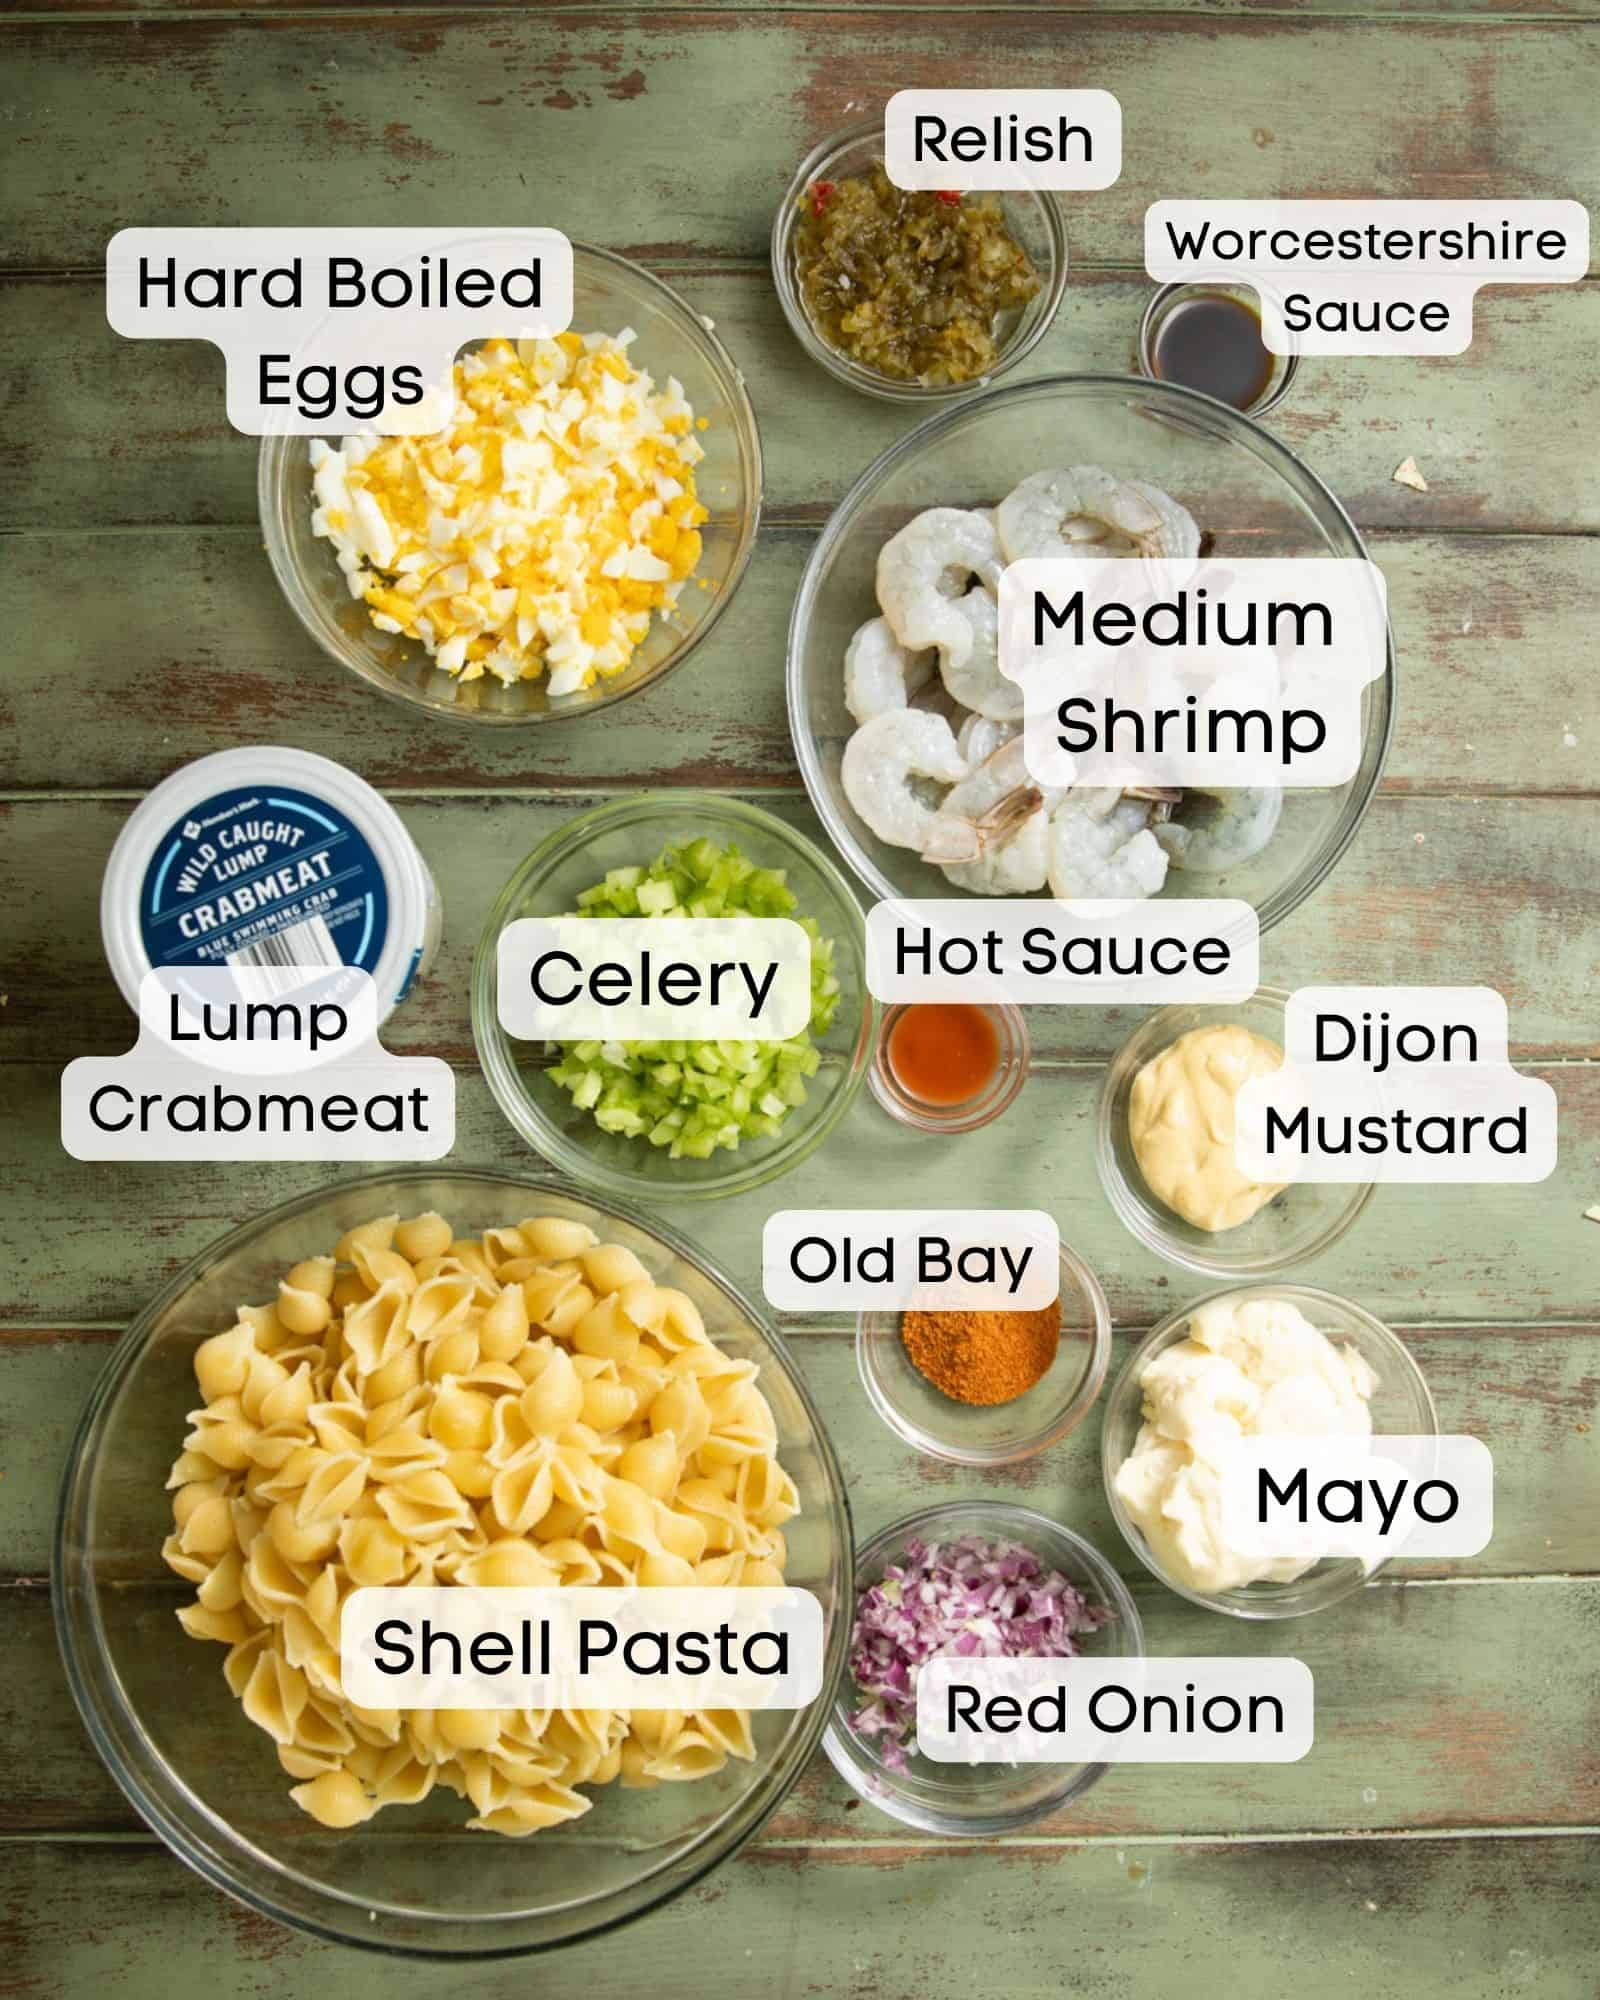 ingredients to make seafood pasta salad - crab meat, shrimp, celery, mayo, red onion, hot sauce, worcestershire sauce, dijon mustard, old bay seasoning, relish, and shell pasta.